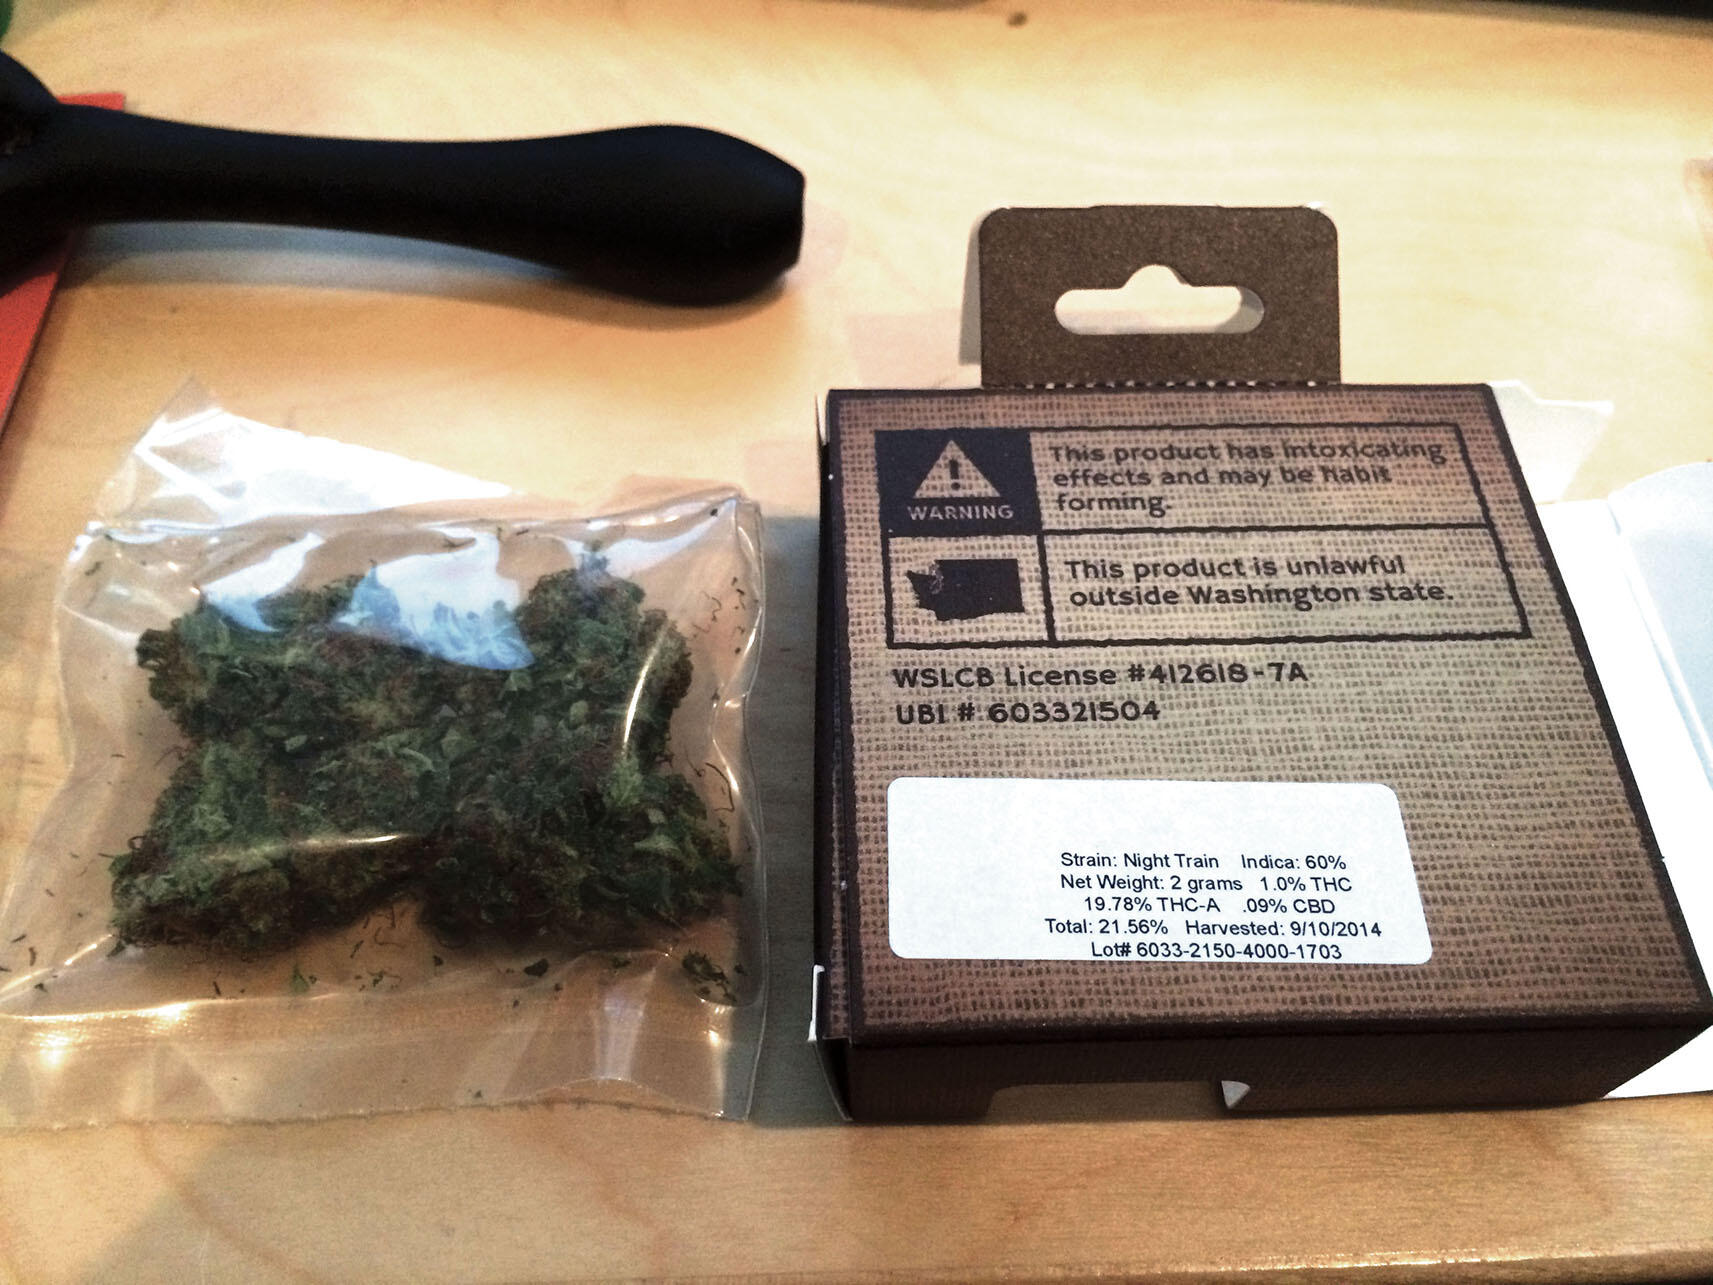 Prepackaged and labeled marijuana in sealed bags in Washington. (Photo by erocsid/Flickr.)